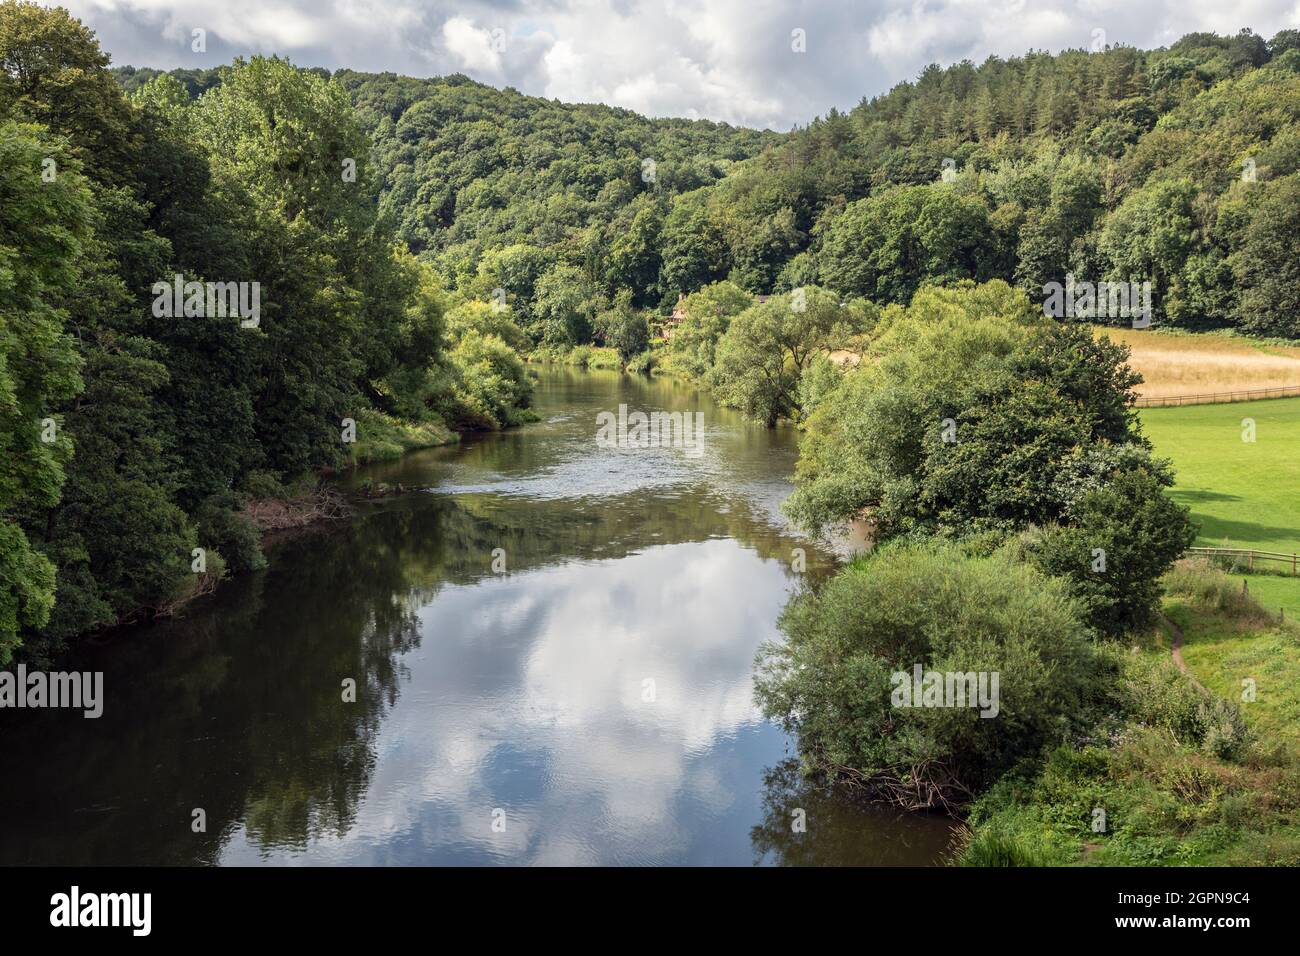 The River Severn seen from a train crossing the Victoria bridge on the Severn Valley Railway, Arley, Worcestershire Stock Photo